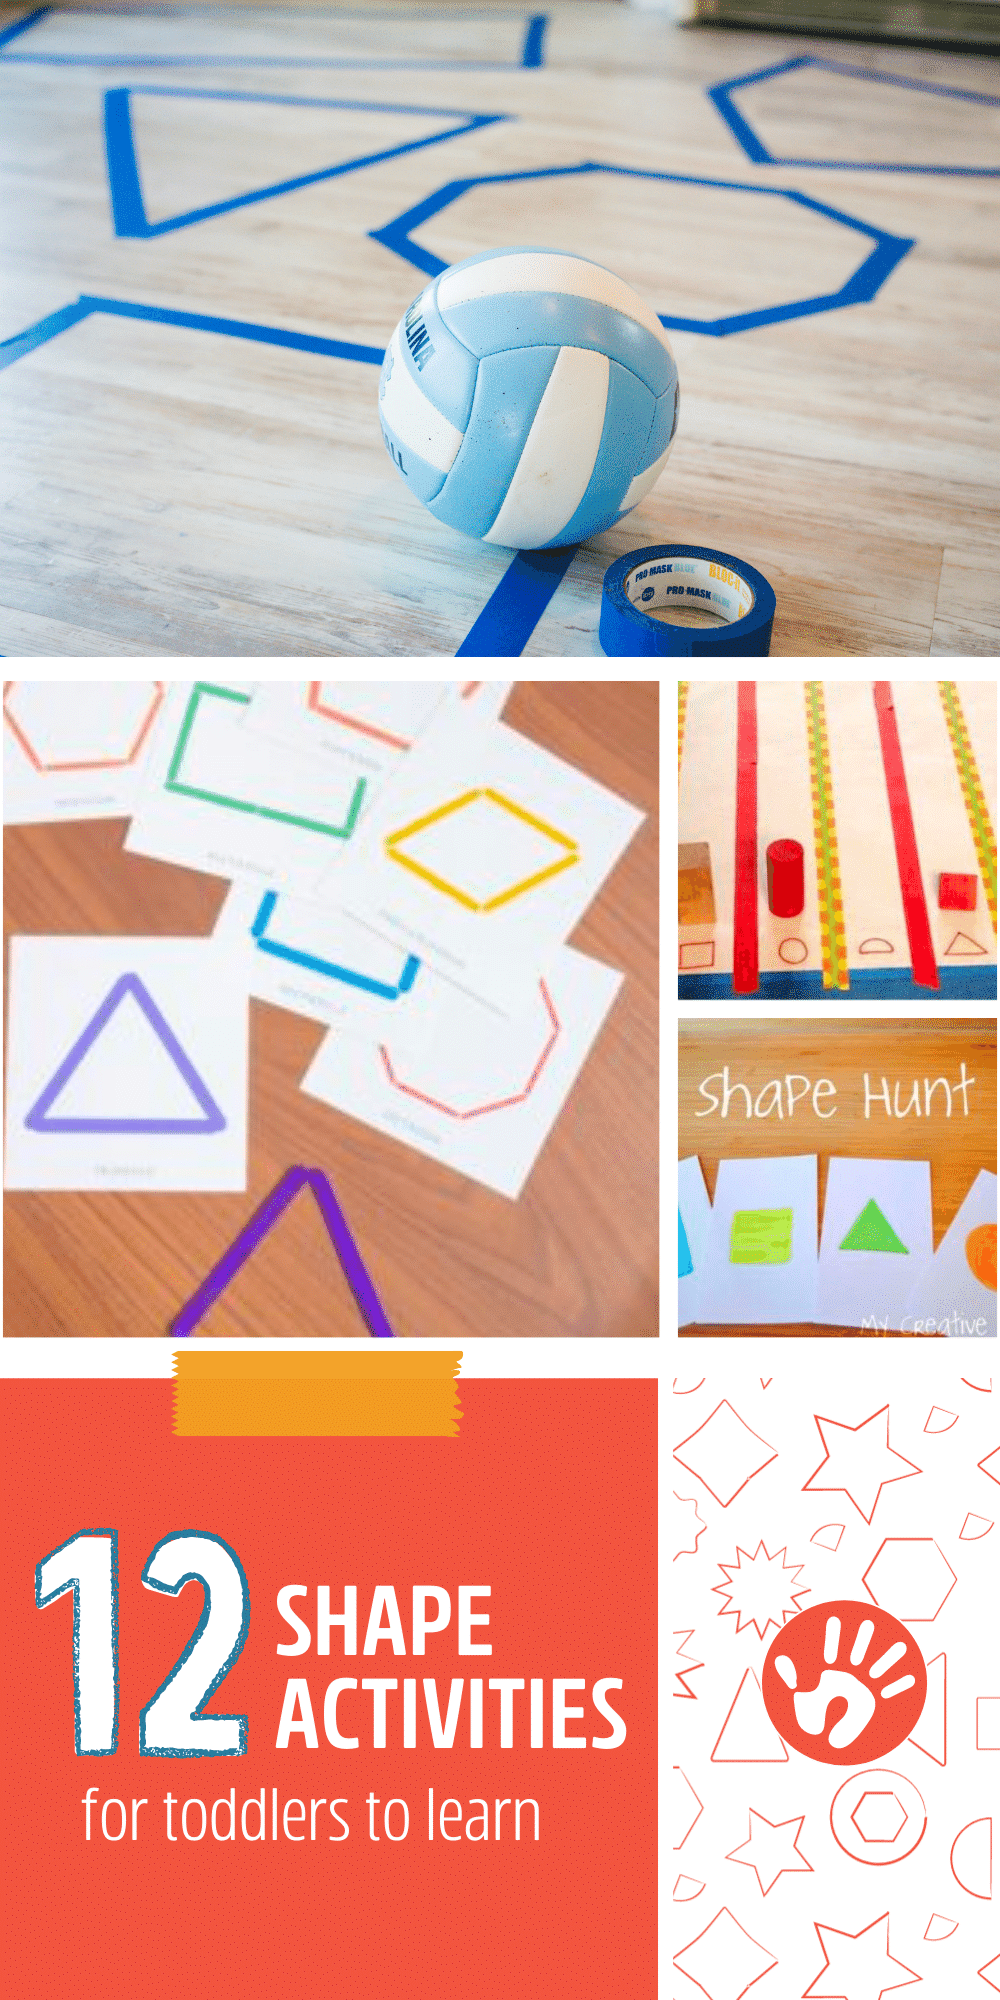 Is your toddler showing interest in shapes? Go ahead and jump on it with these super fun and simple activities that are play based learning.